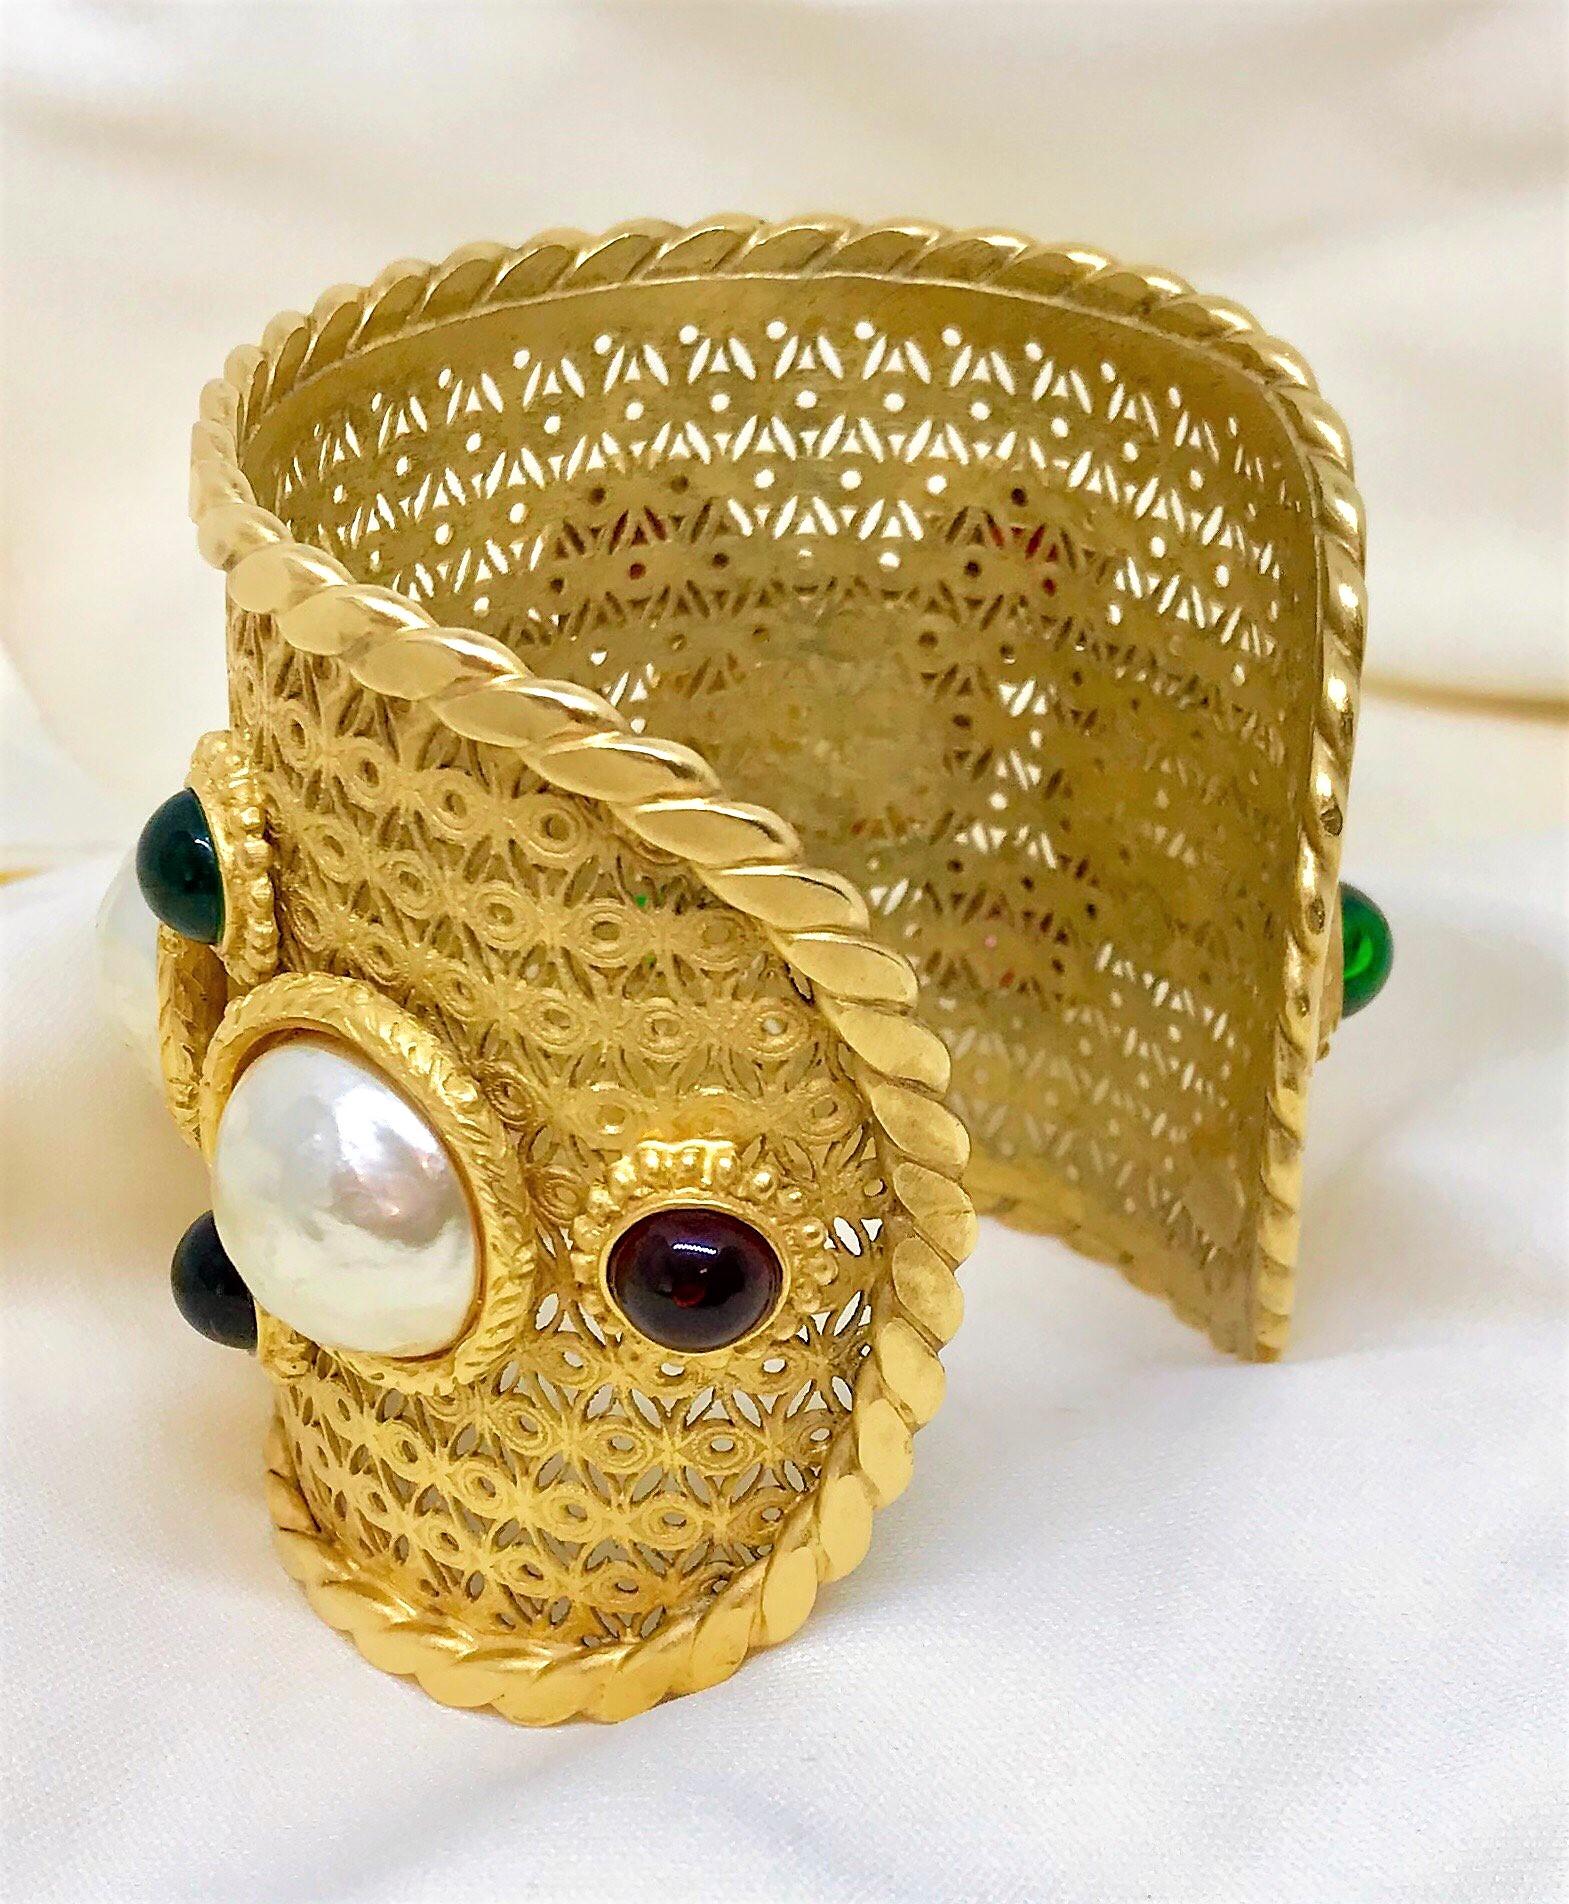 Circa 1980s Deanna Hamro Gold-Plated Faux-Pearl and  Cabochon Jeweled Cuff  (Neorenaissance)